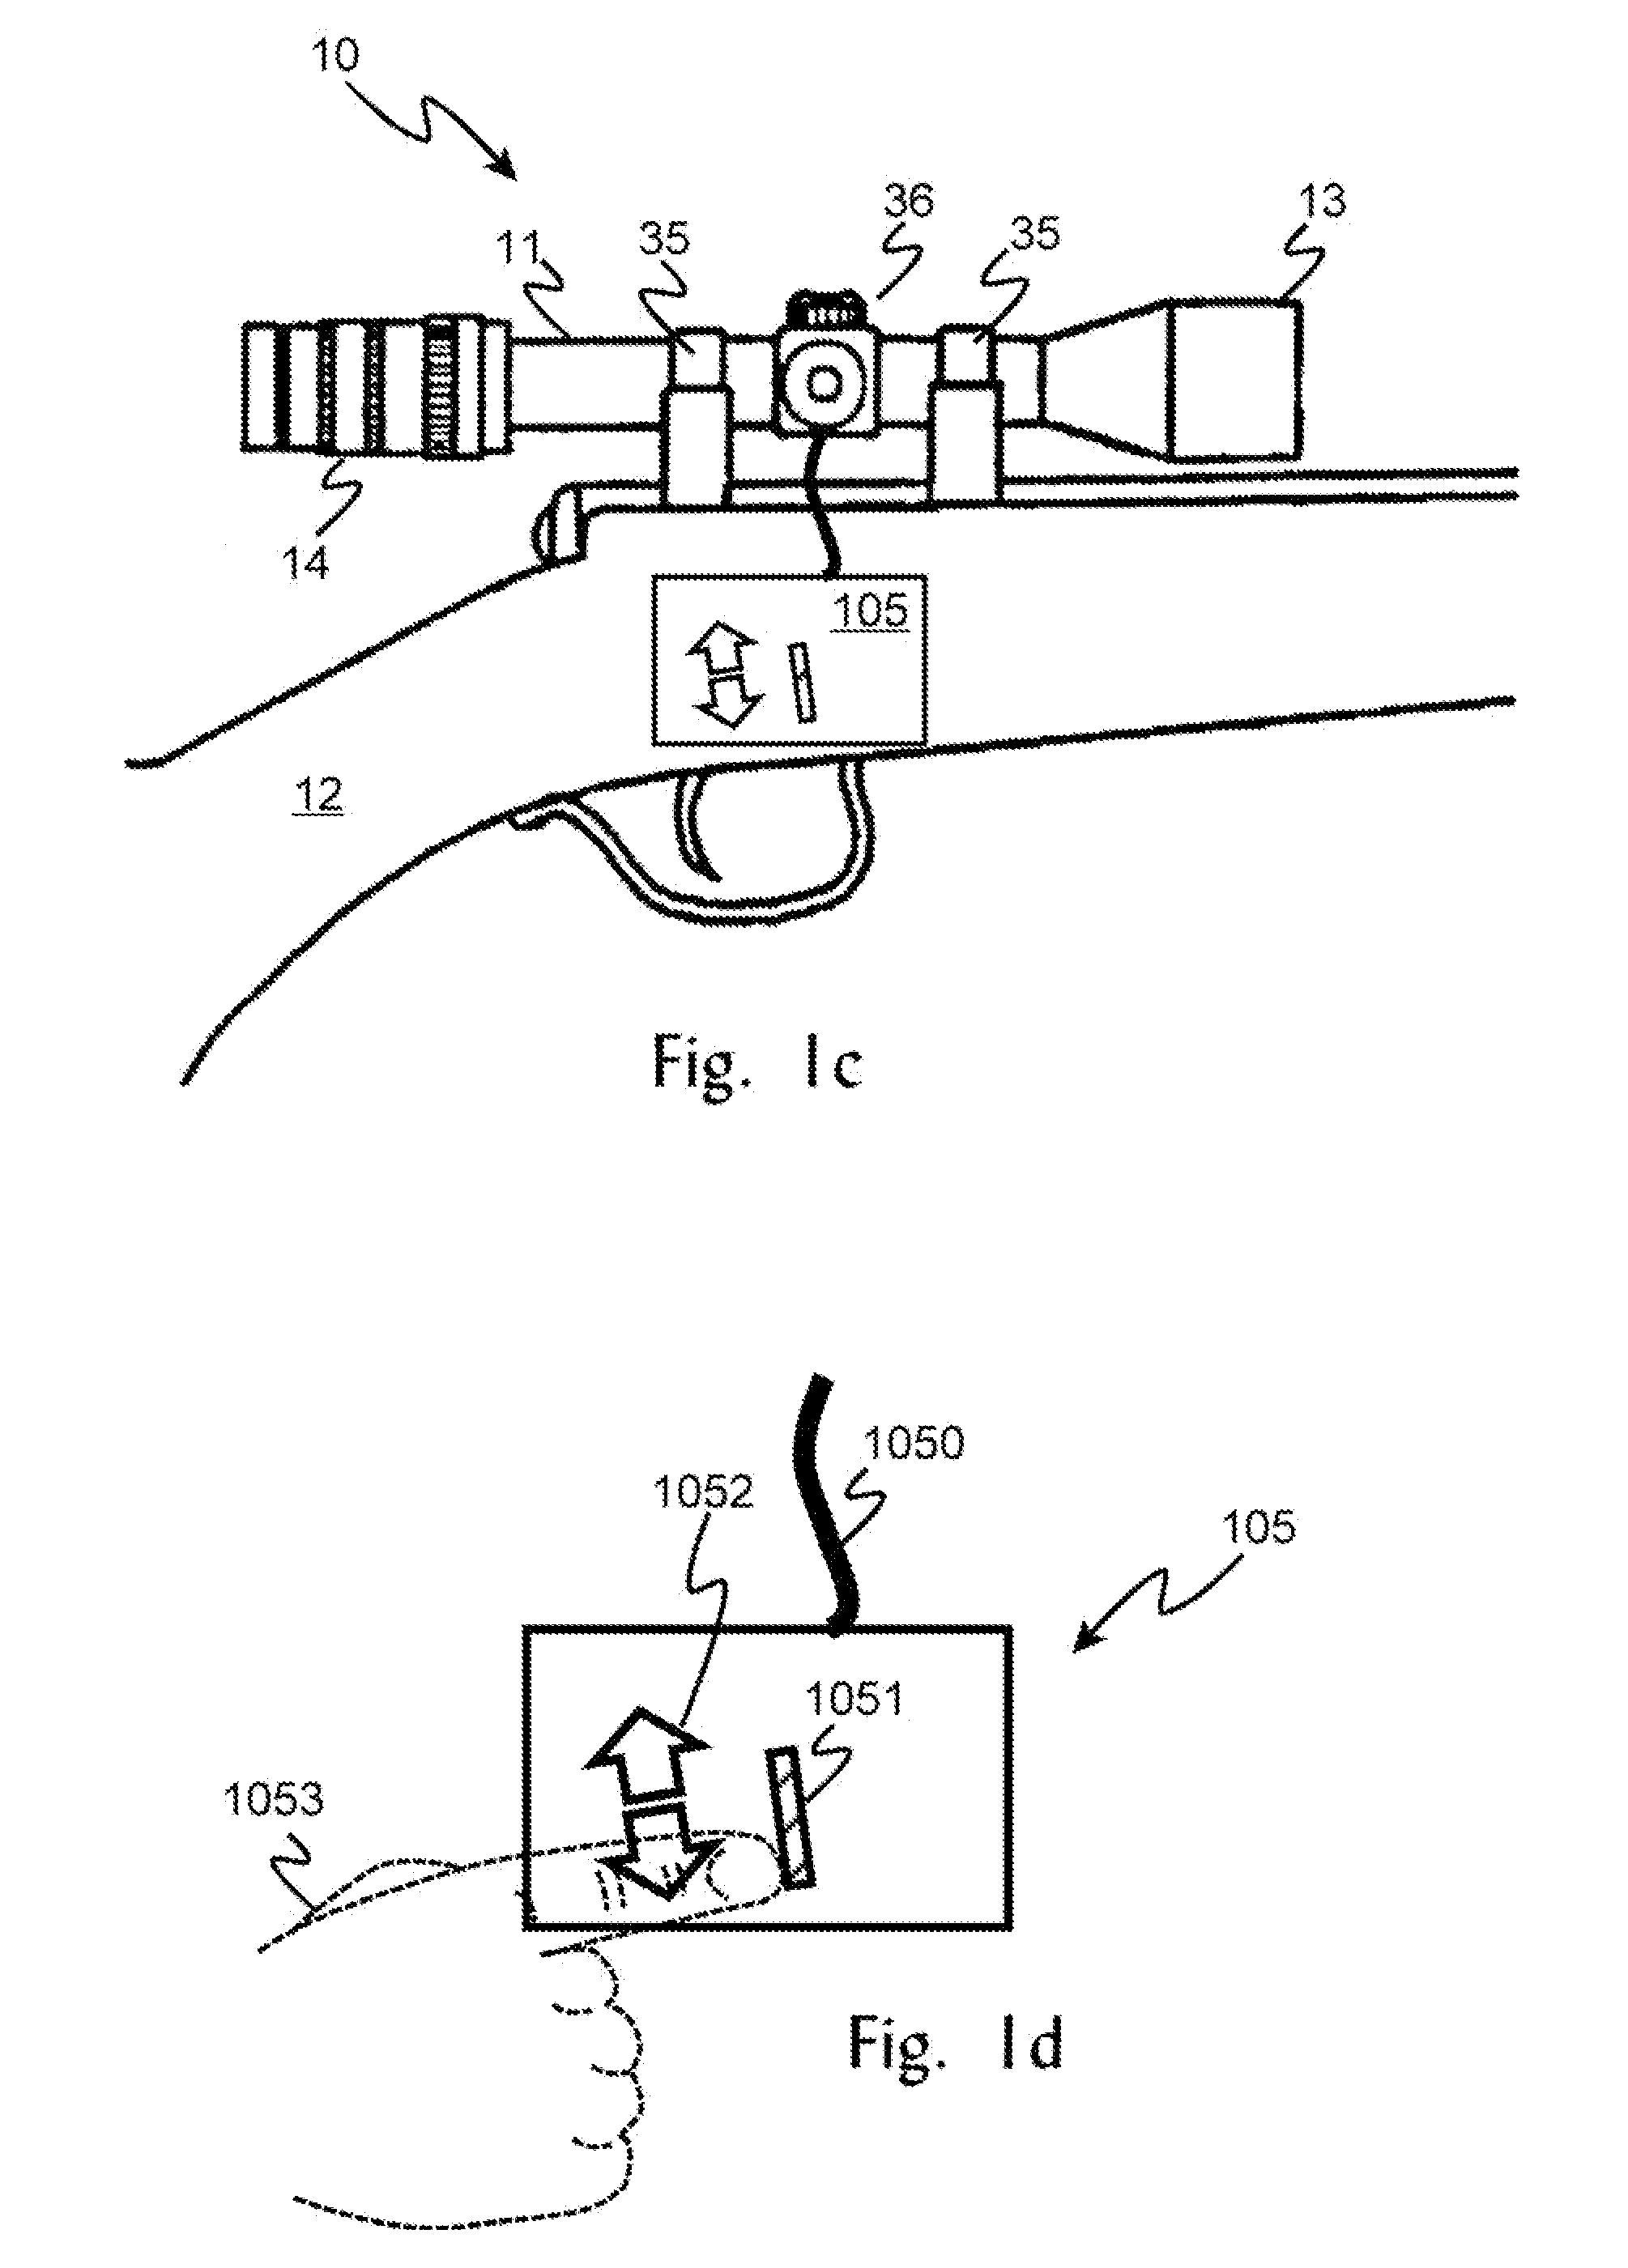 System and method for determining target range and coordinating team fire